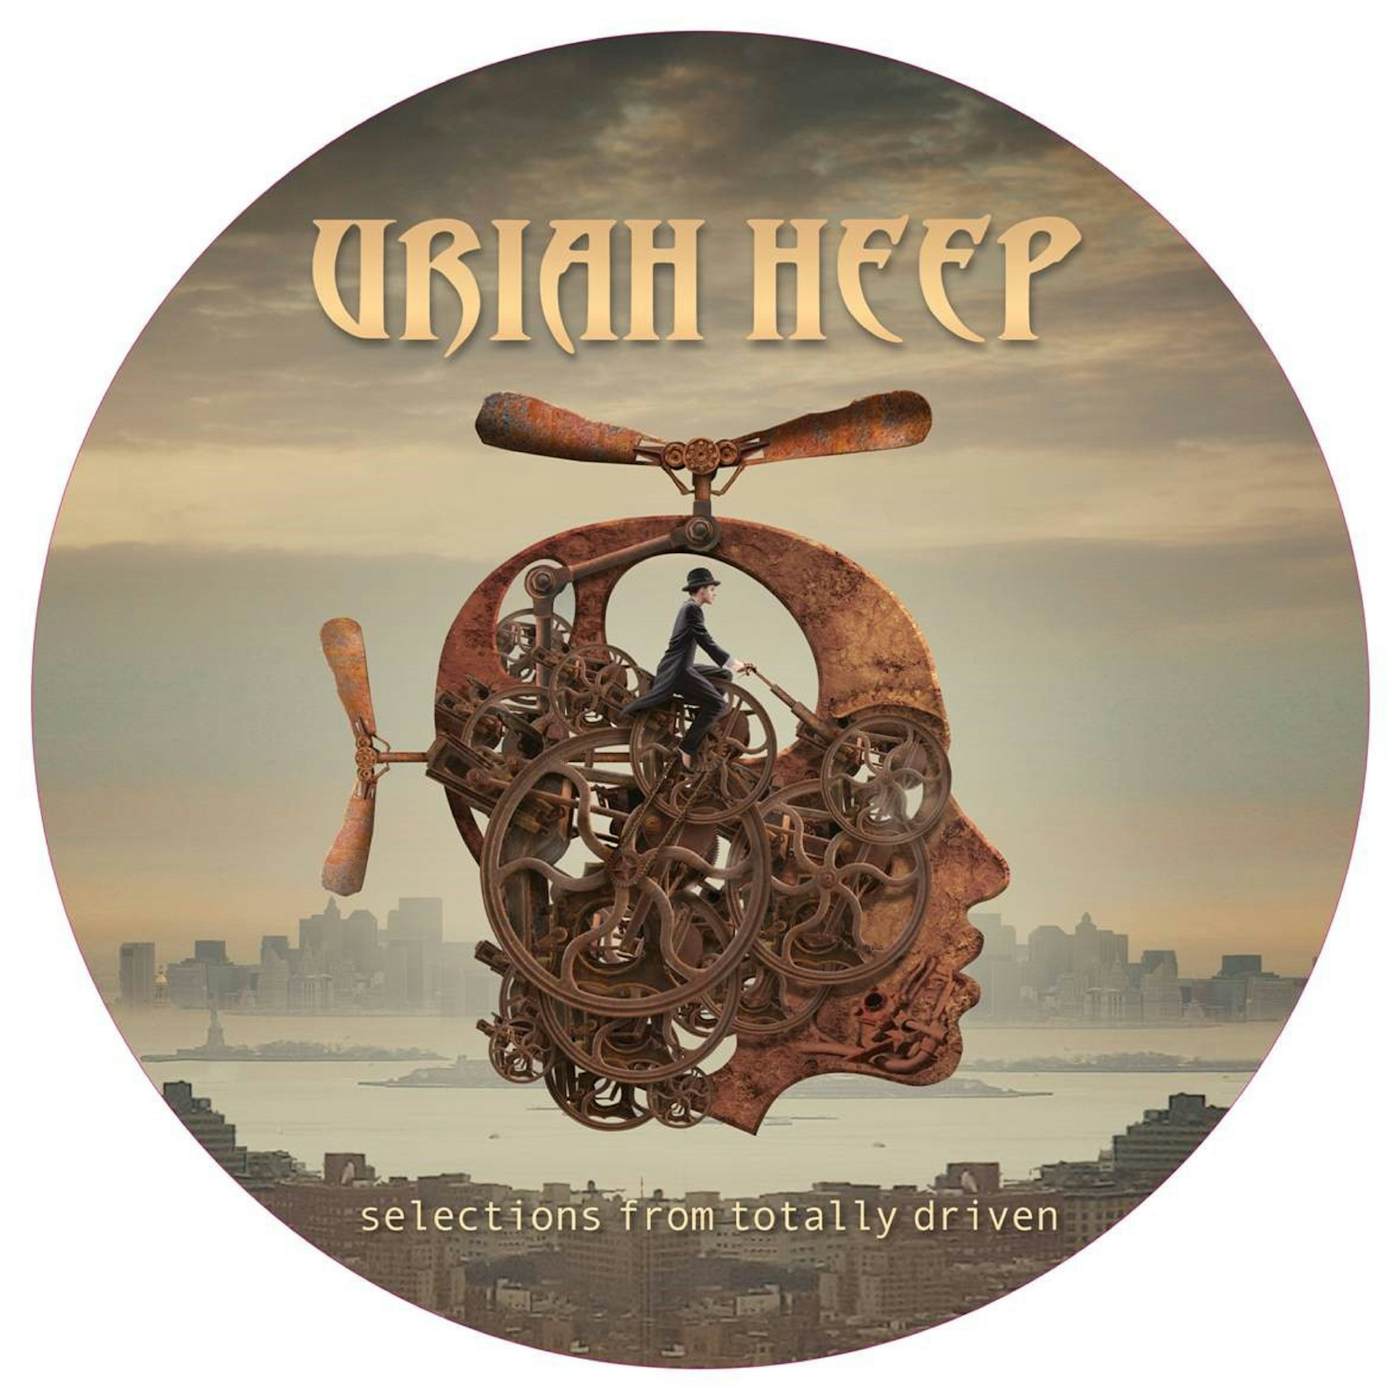 Uriah Heep SELECTIONS FROM TOTALLY DRIVEN (PICTURE DISC) Vinyl Record